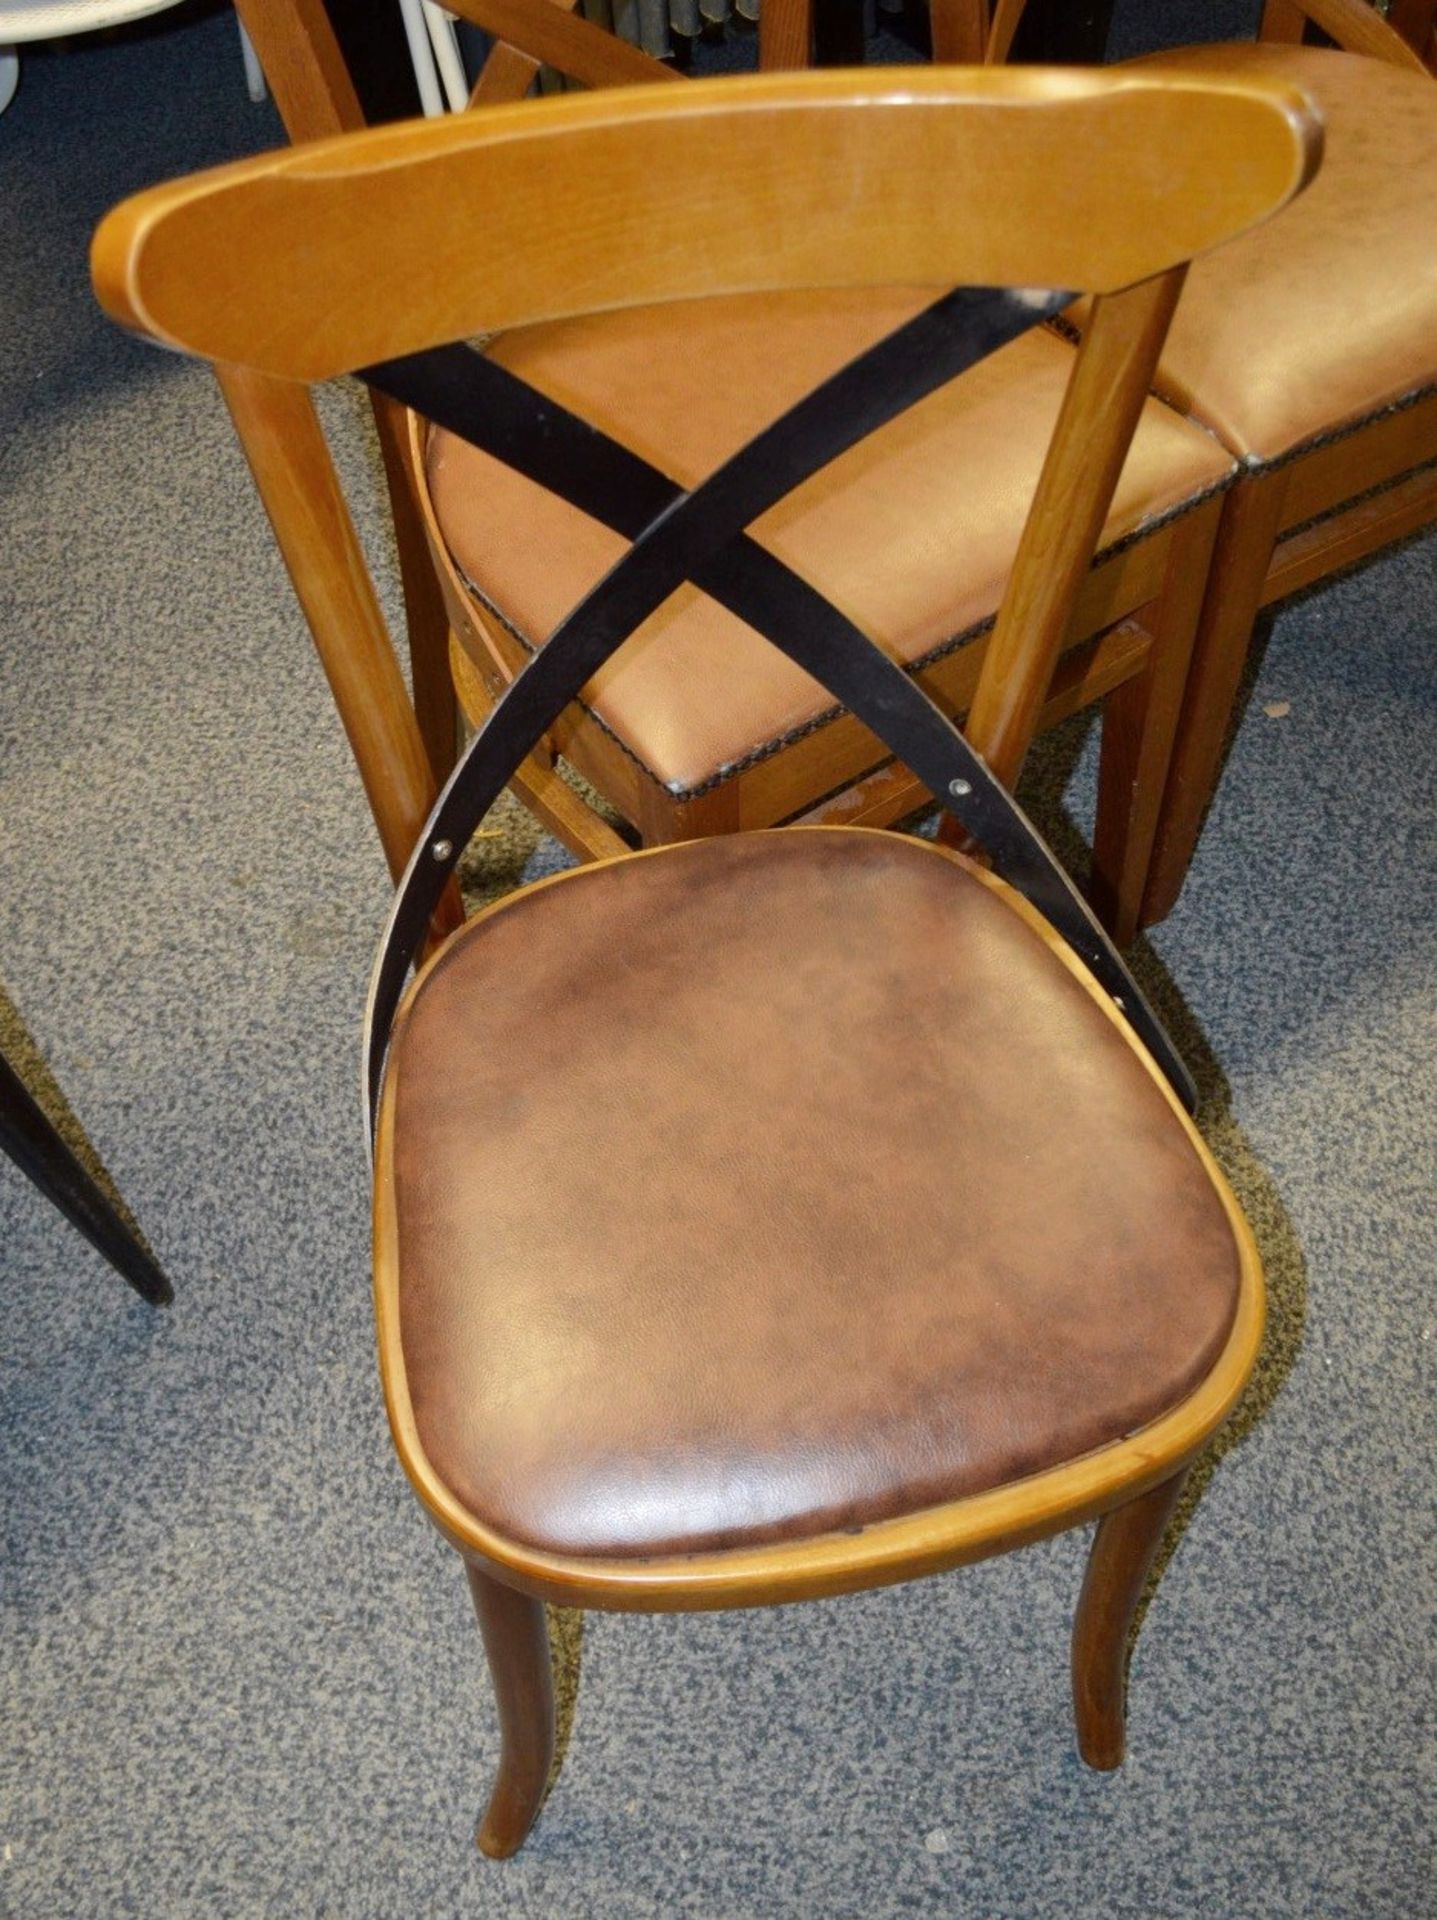 4 x Assorted Cross-Back Dining Chairs - Dimensions: W43 x D40 x H82 x Seat 46cm - Used - Ref614 - - Image 2 of 7